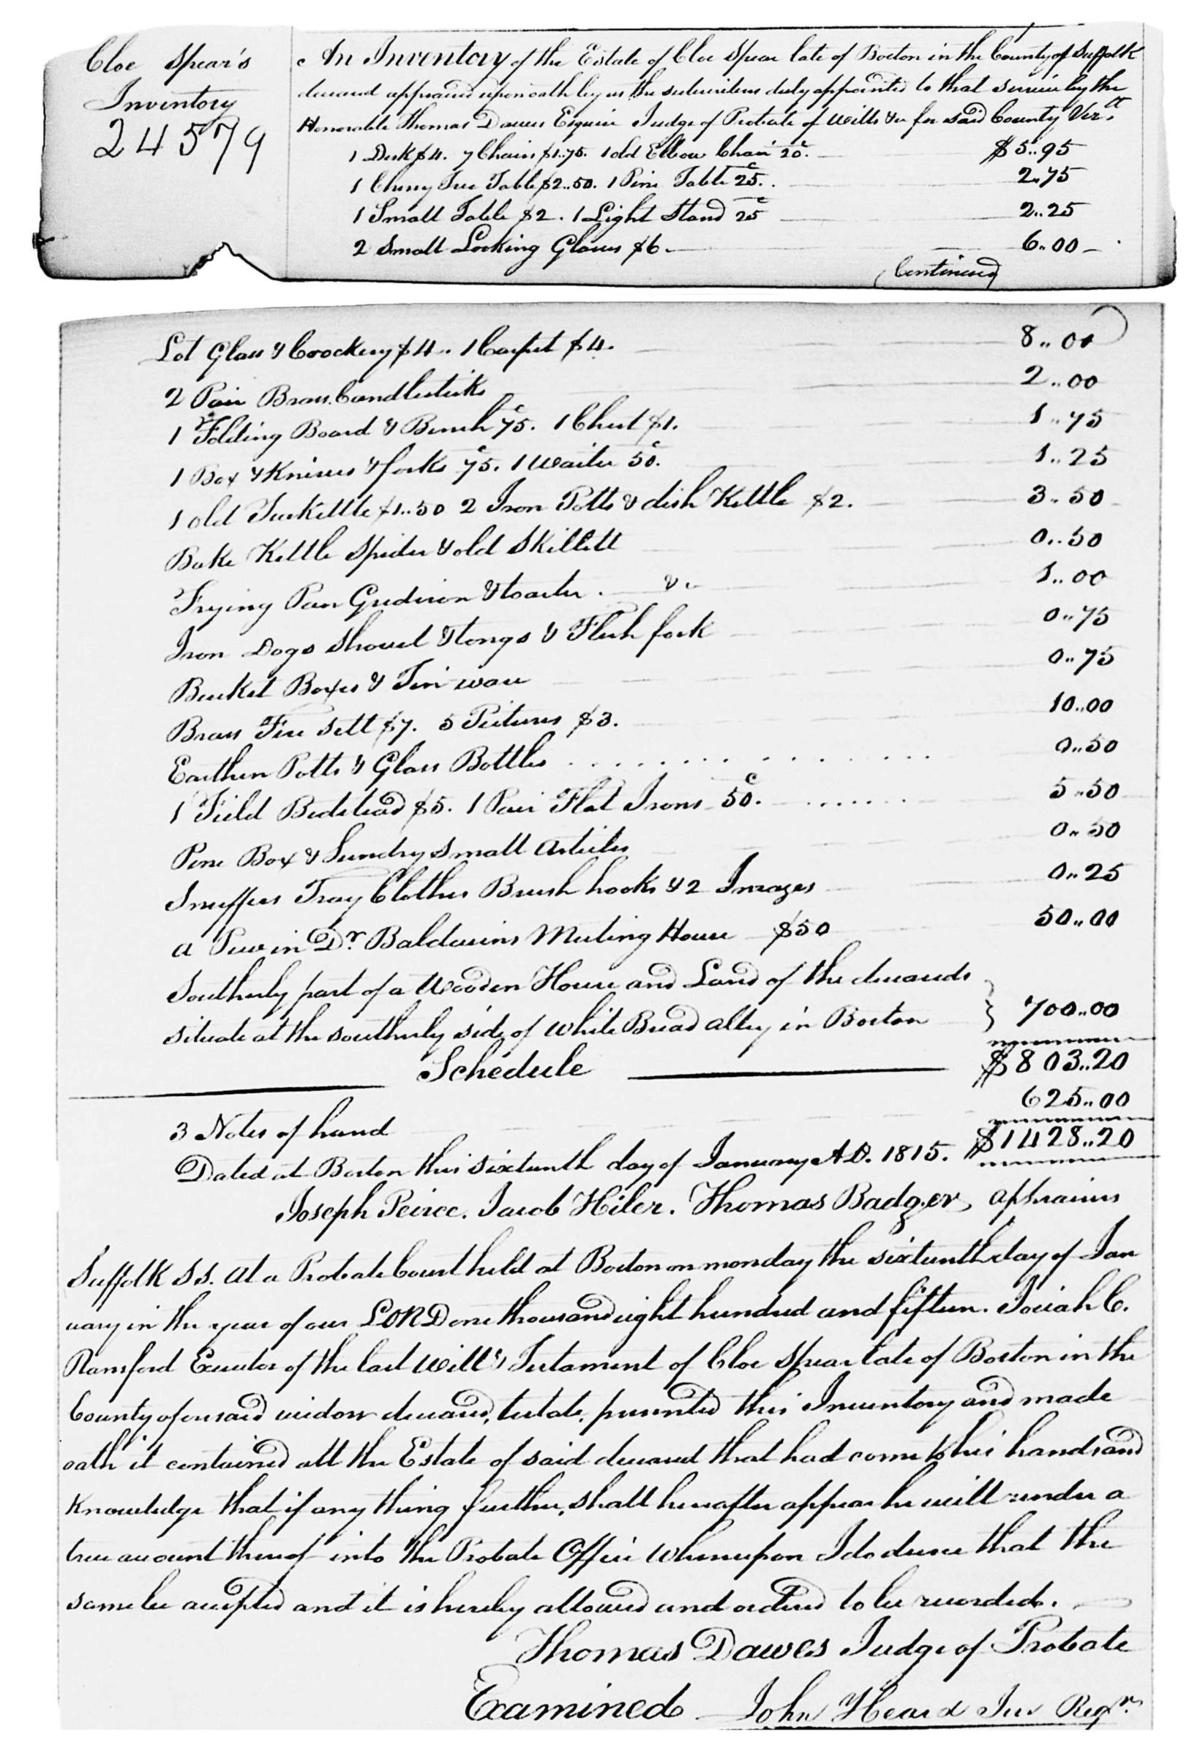 Handwritten copy of Chloe Spear's probate inventory listing her house and land in White Bread Alley at 700 pounds.